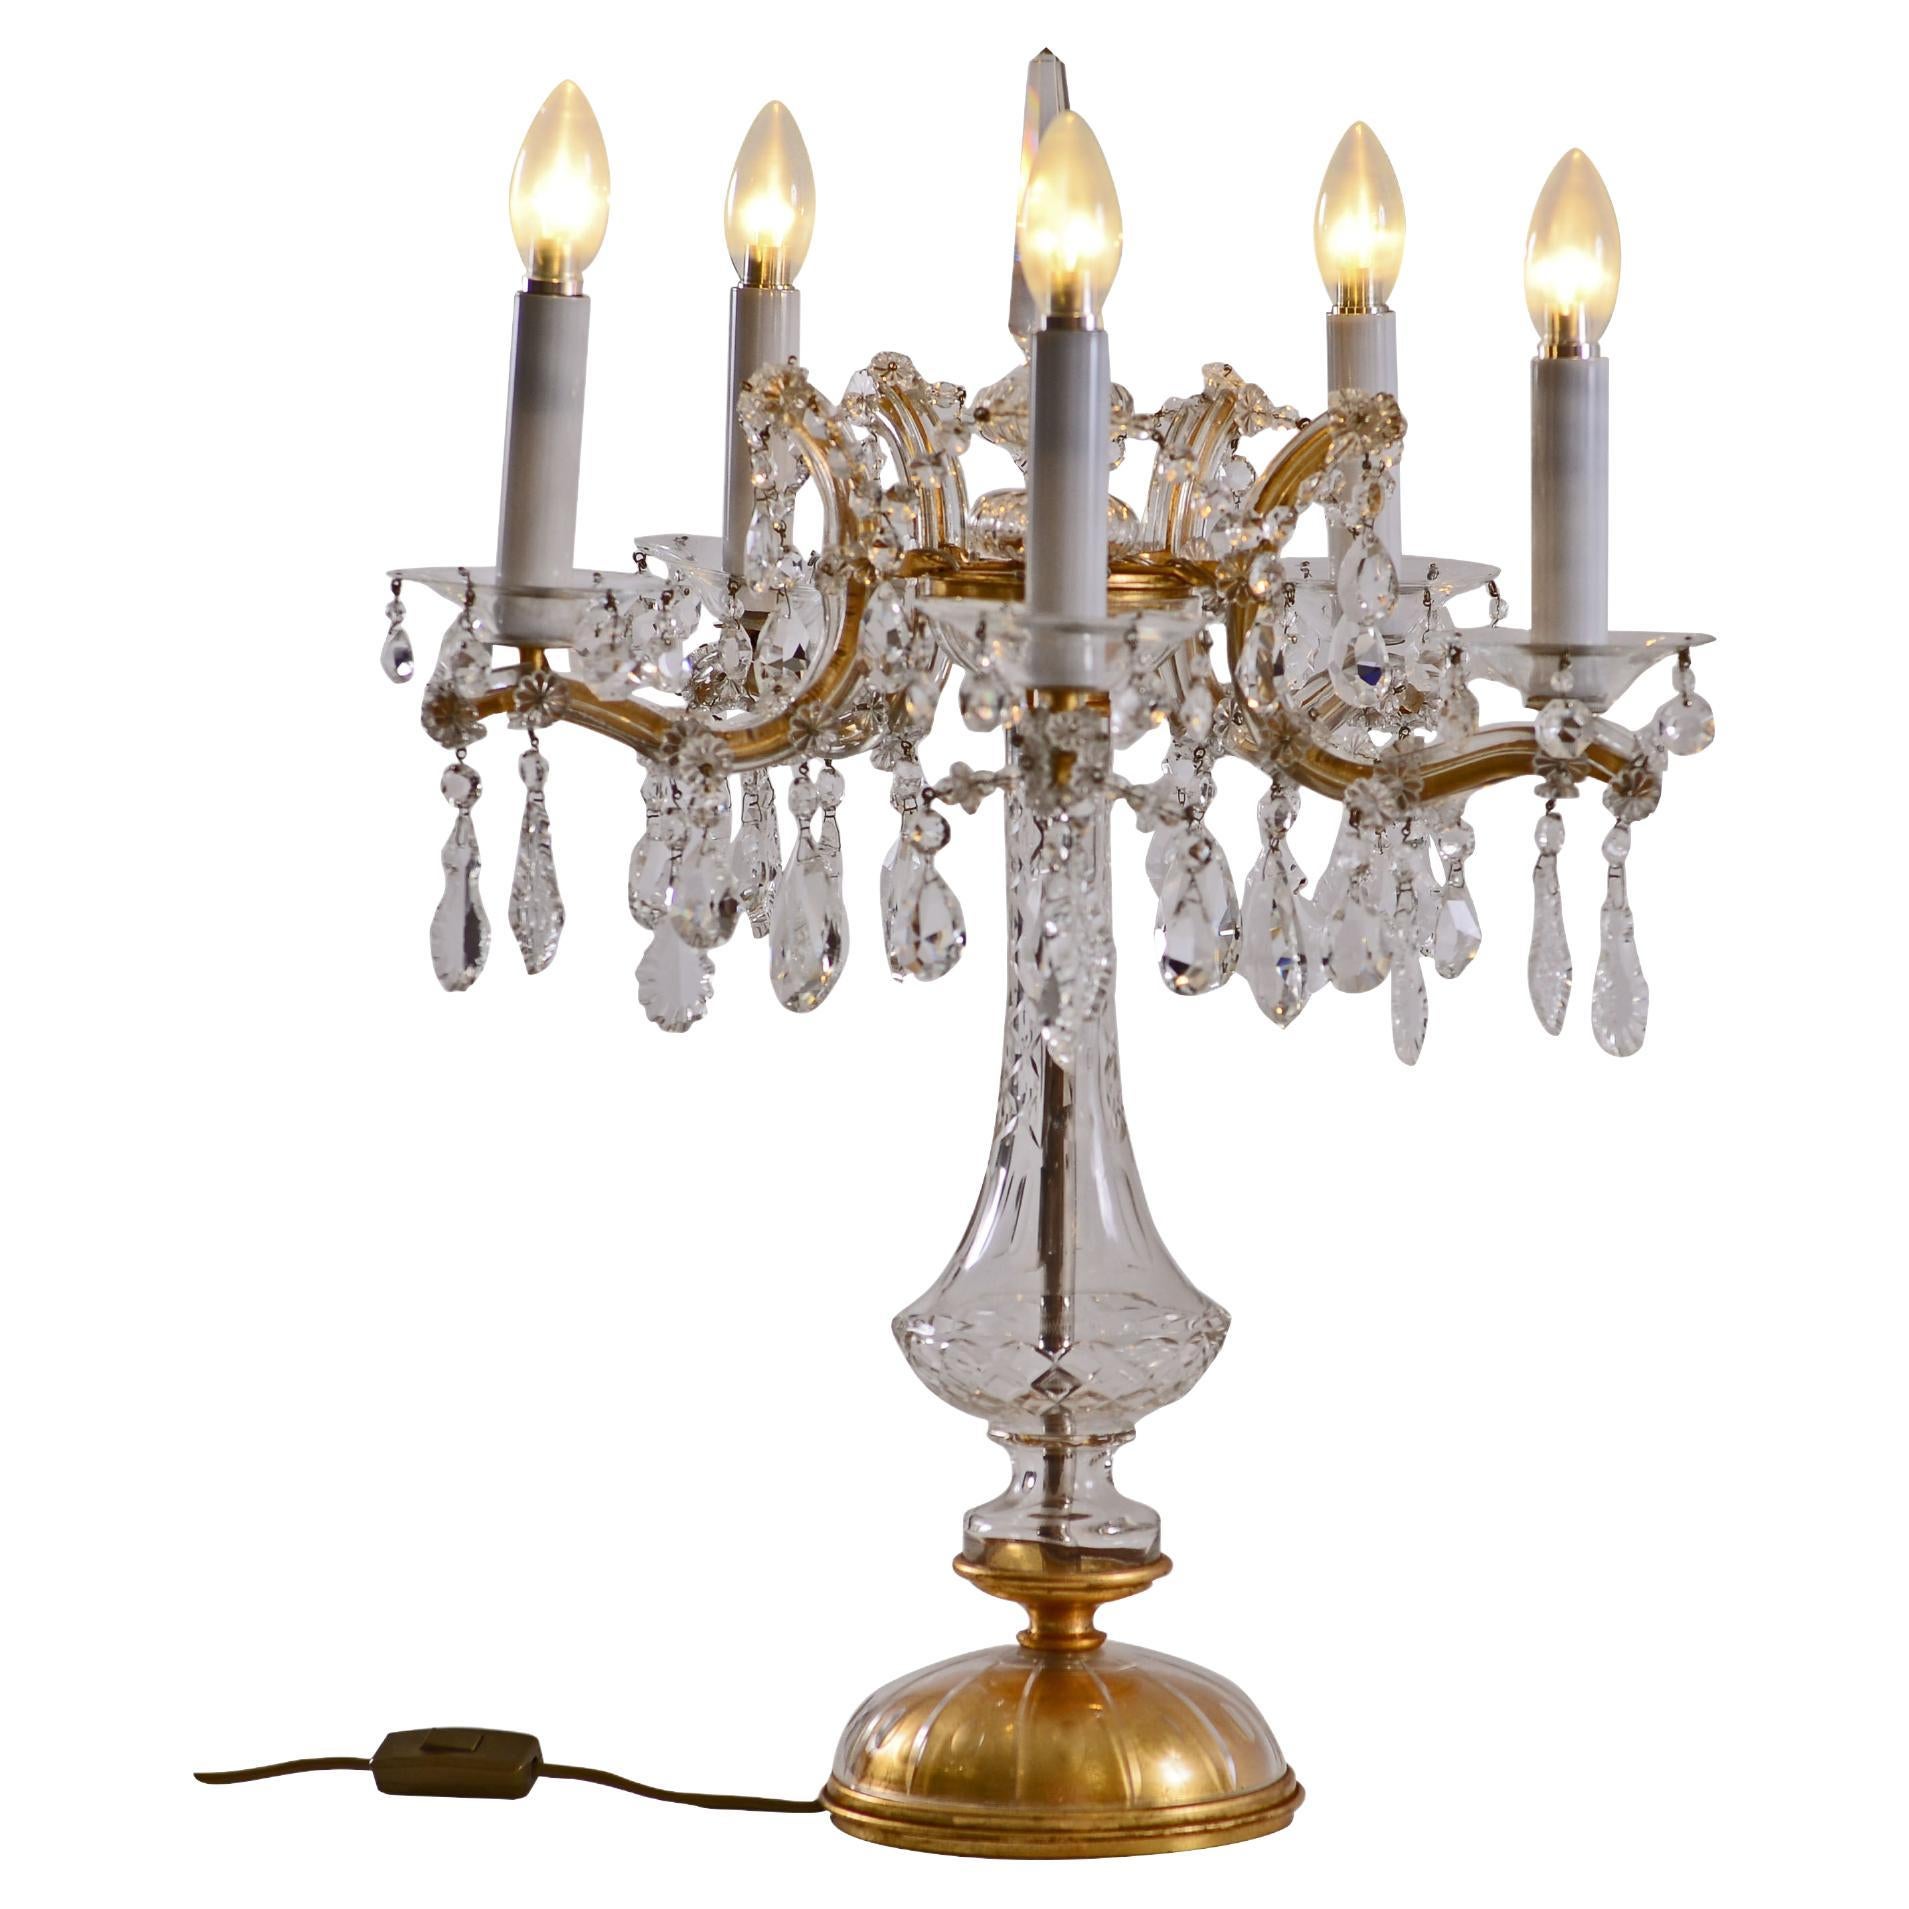 Maria Theresia Crystal Glass Table Lamp Early 20th Century Original from 1900 For Sale